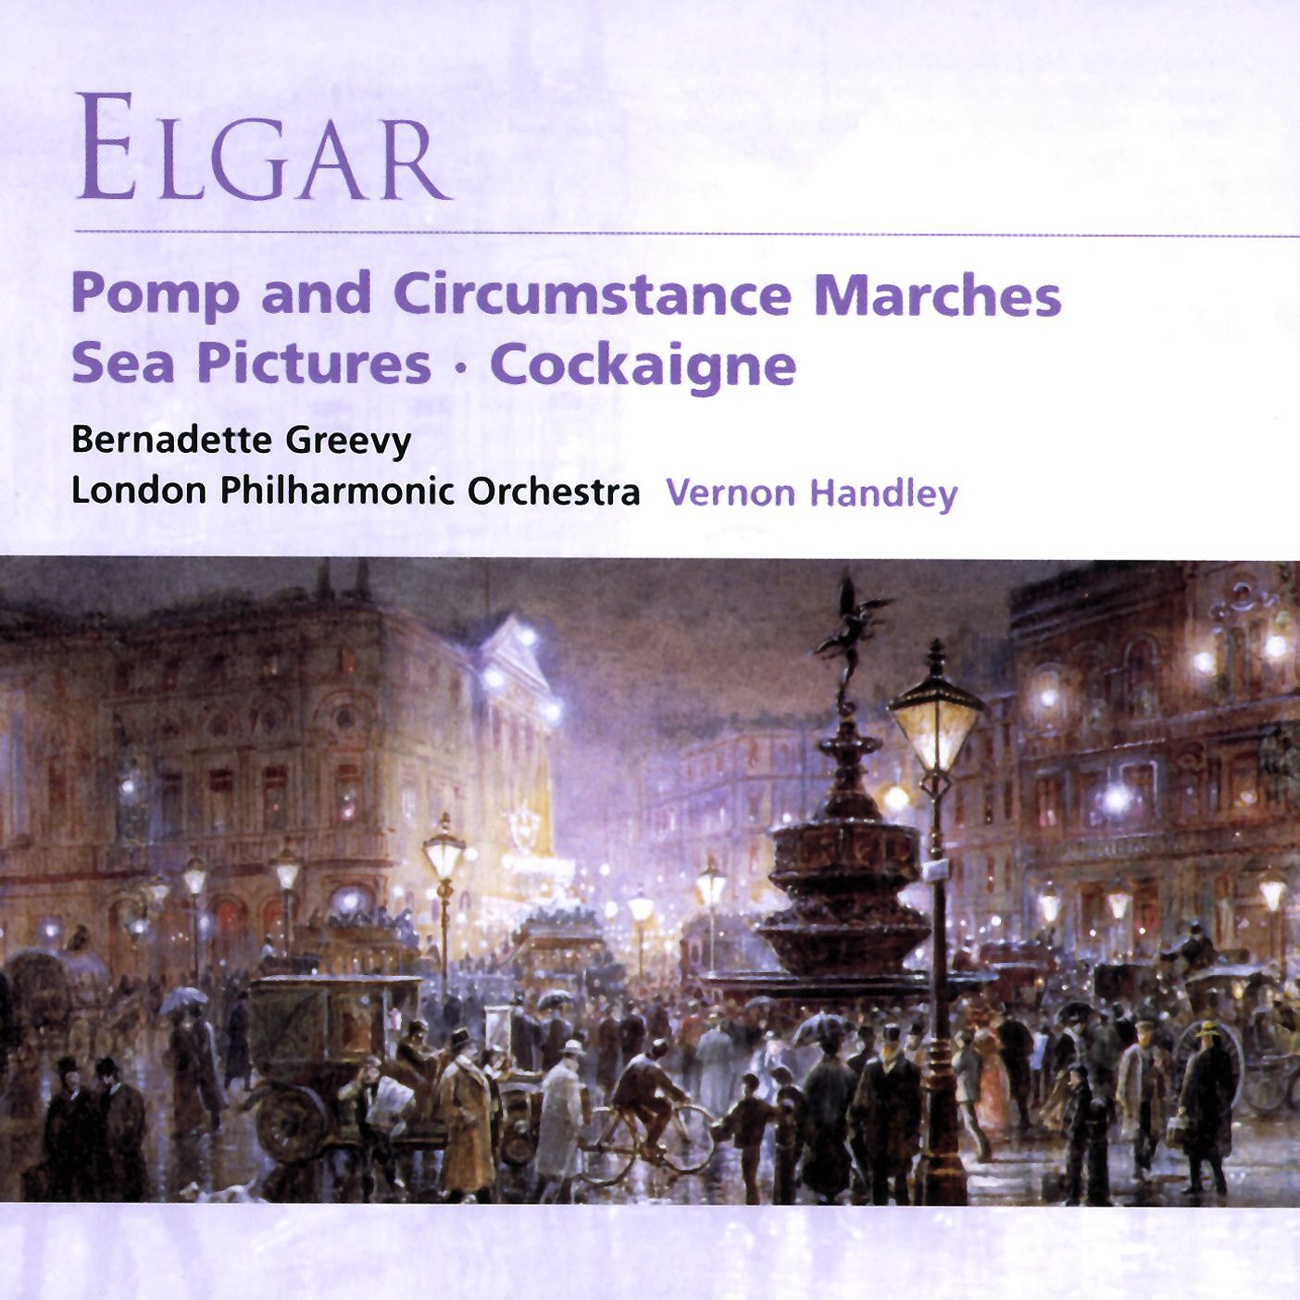 Pomp and Circumstance - Military Marches Op. 39: No. 2 in A minor